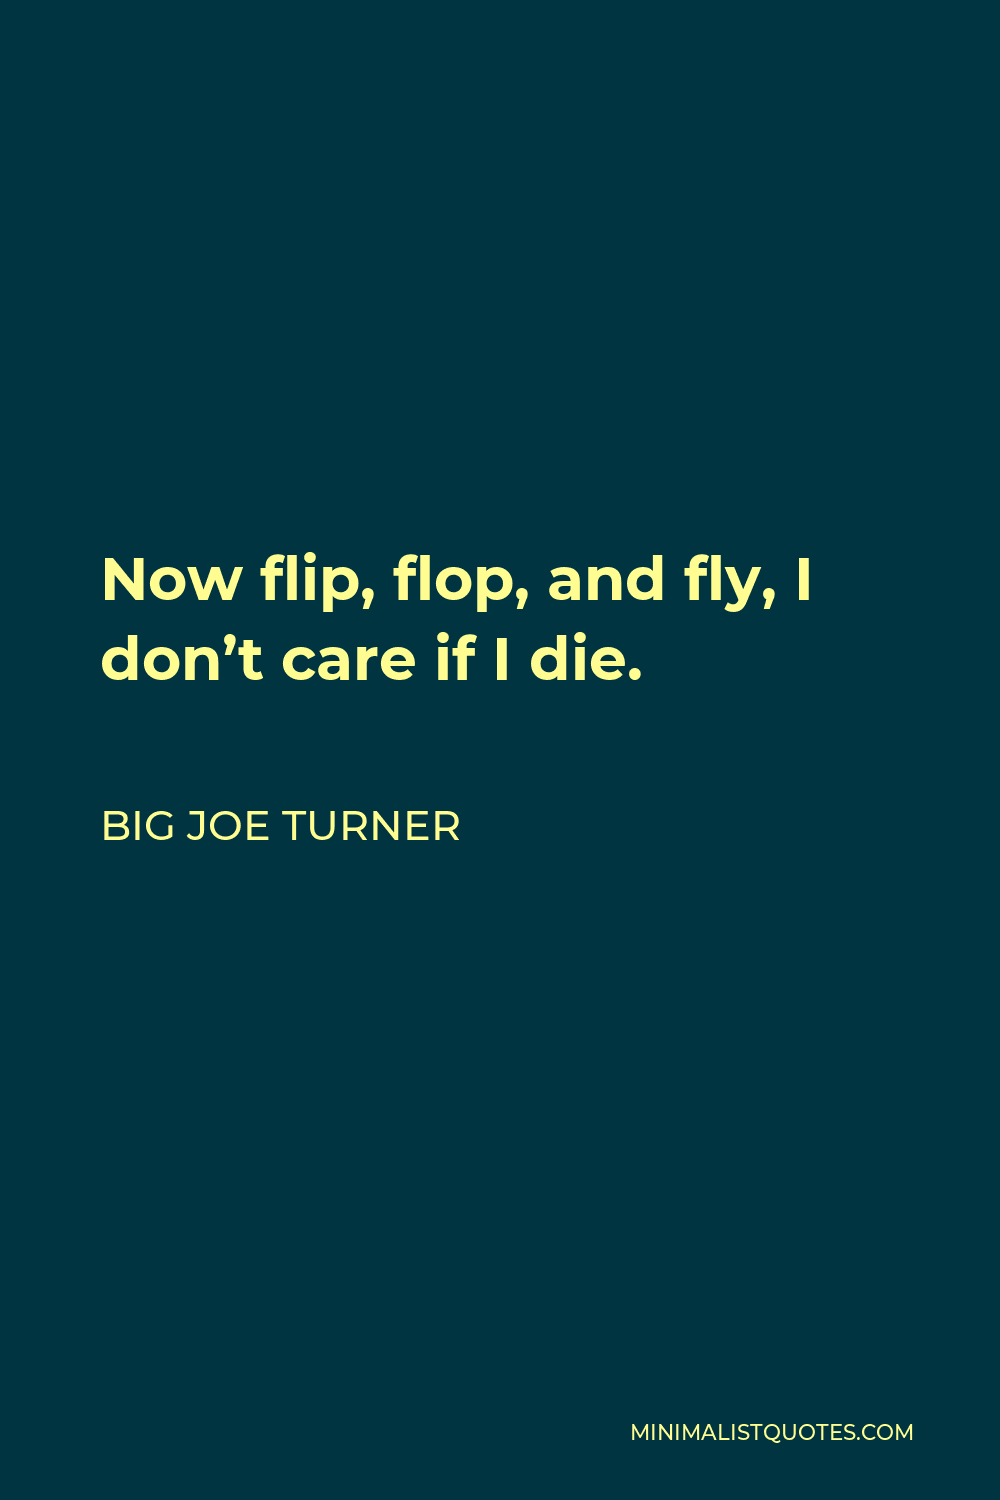 Big Joe Turner Quote - Now flip, flop, and fly, I don’t care if I die.